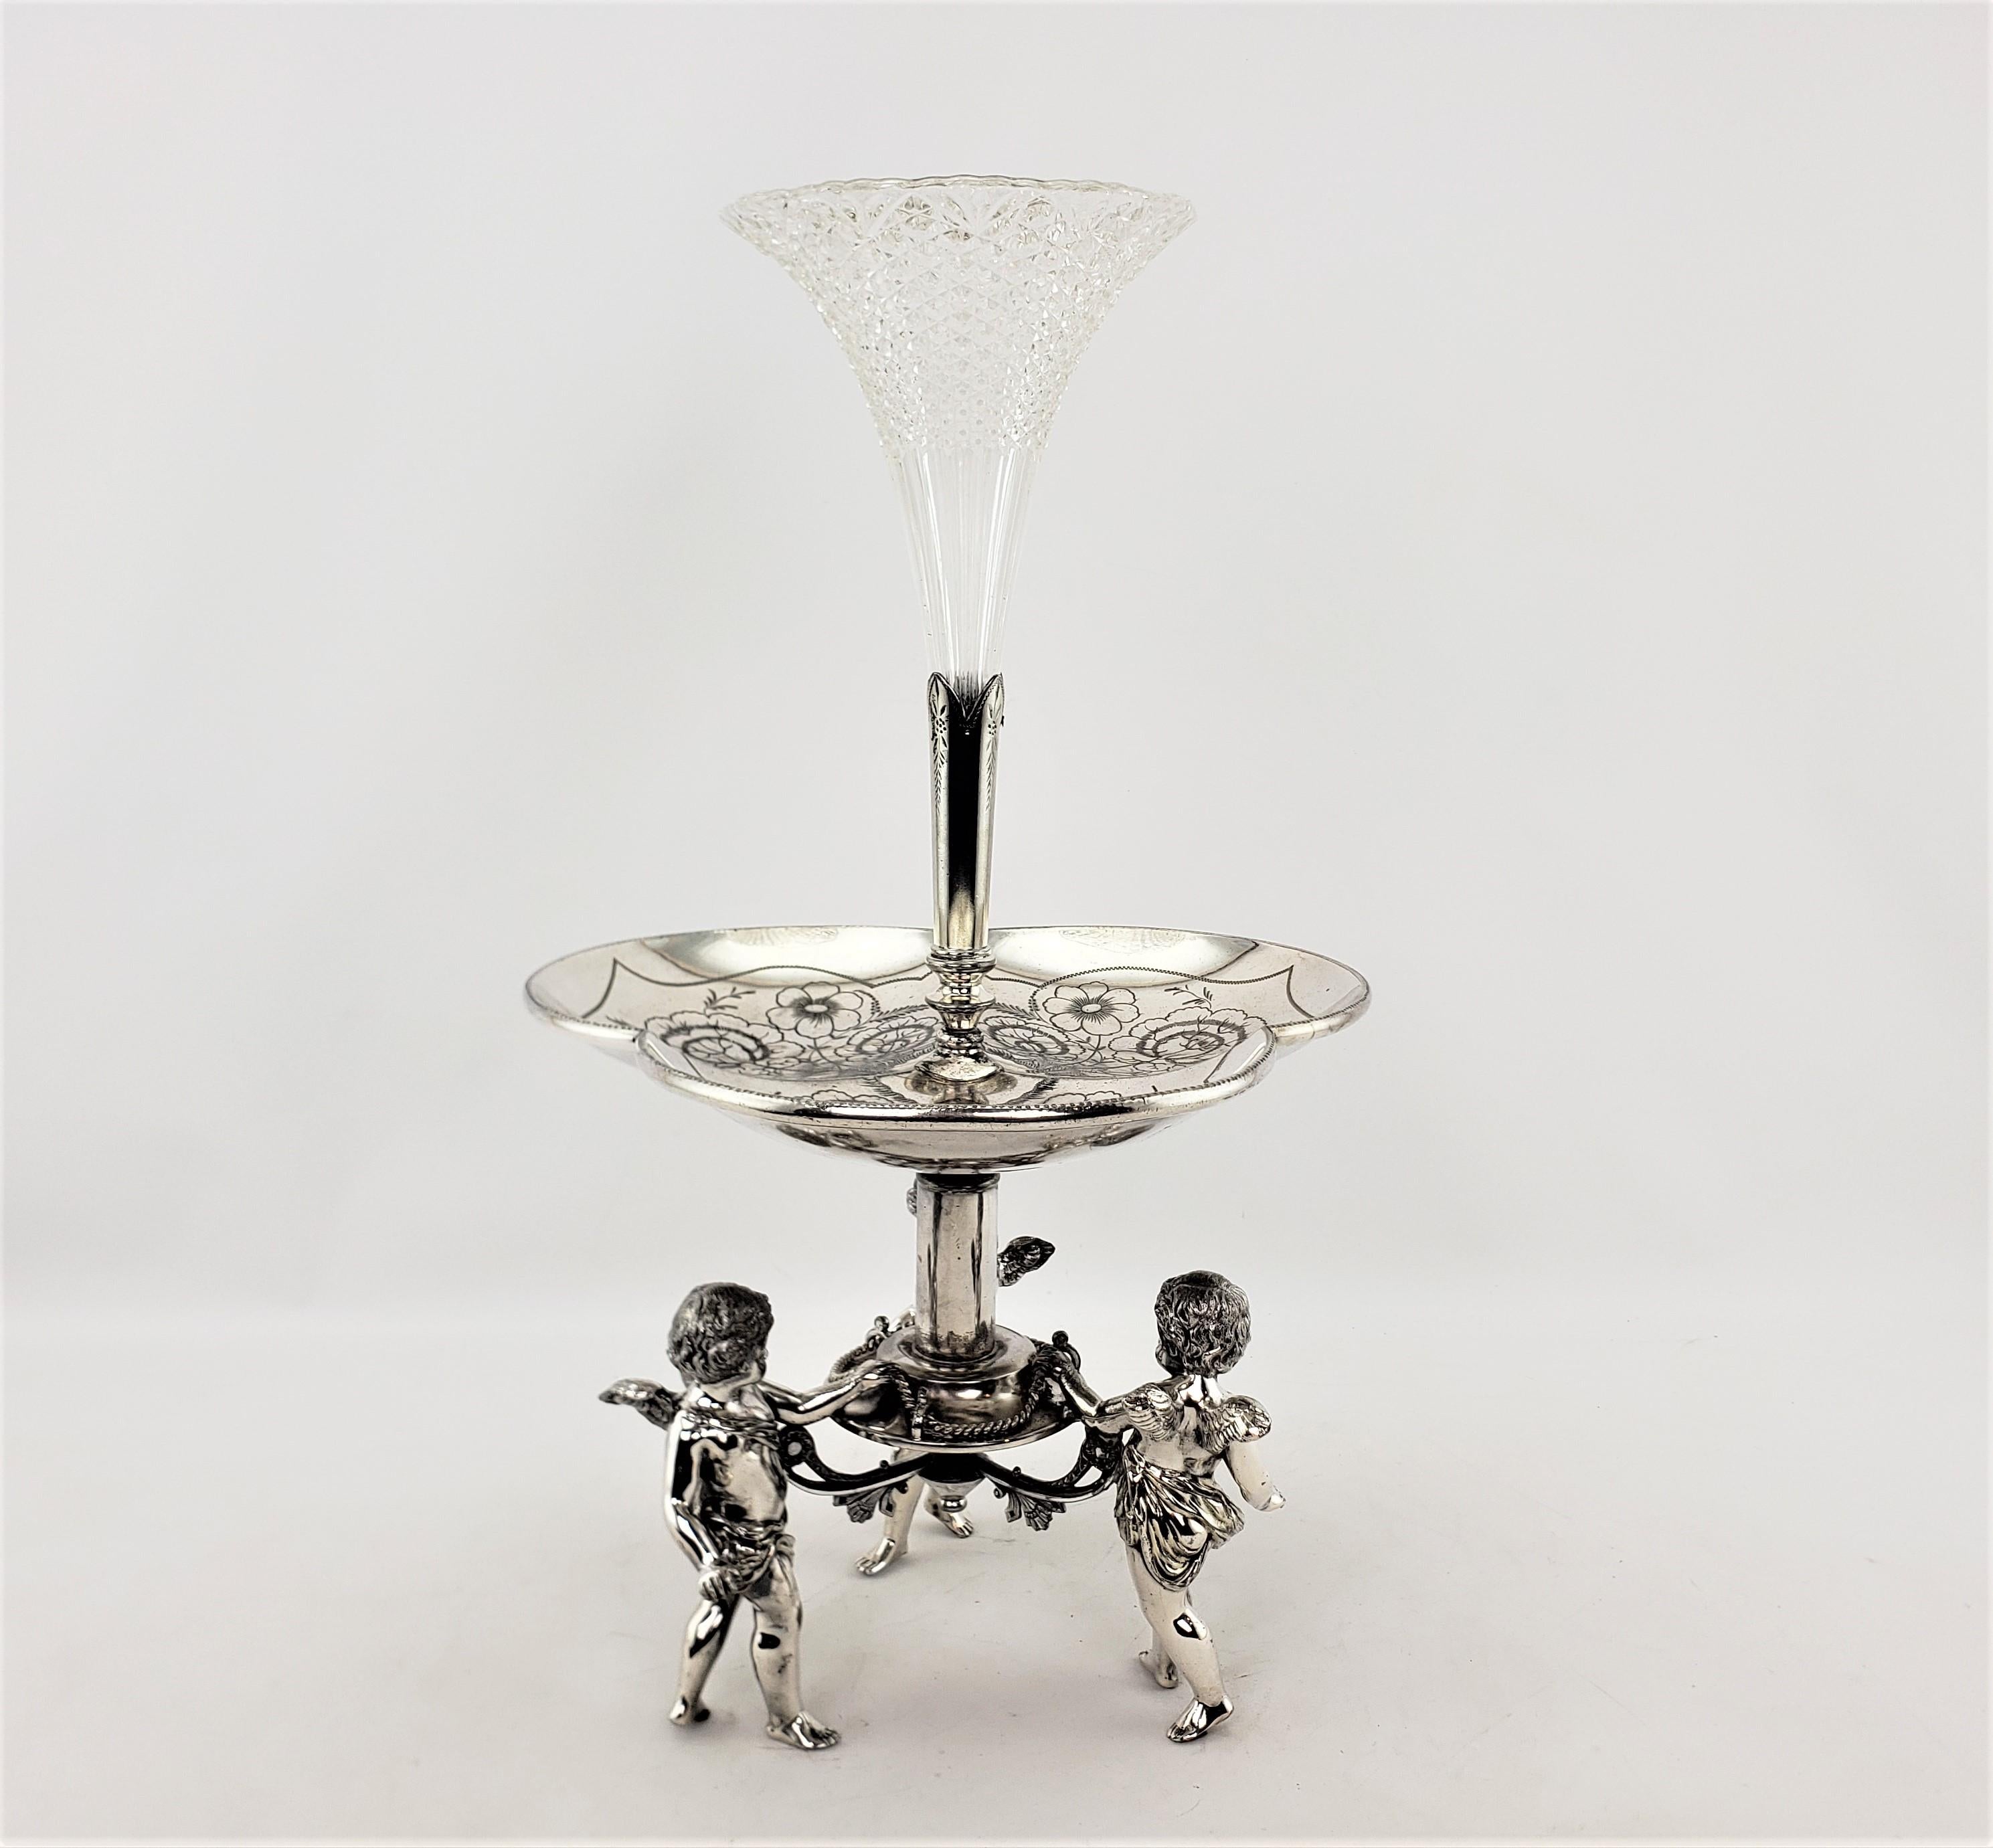 This large centerpiece or epergne was made by the well known Wilcox Silver Plate Company of the United States in approximately 1900 and done in a Victorian style. The base is composed of silver plate and features three figural children holding a